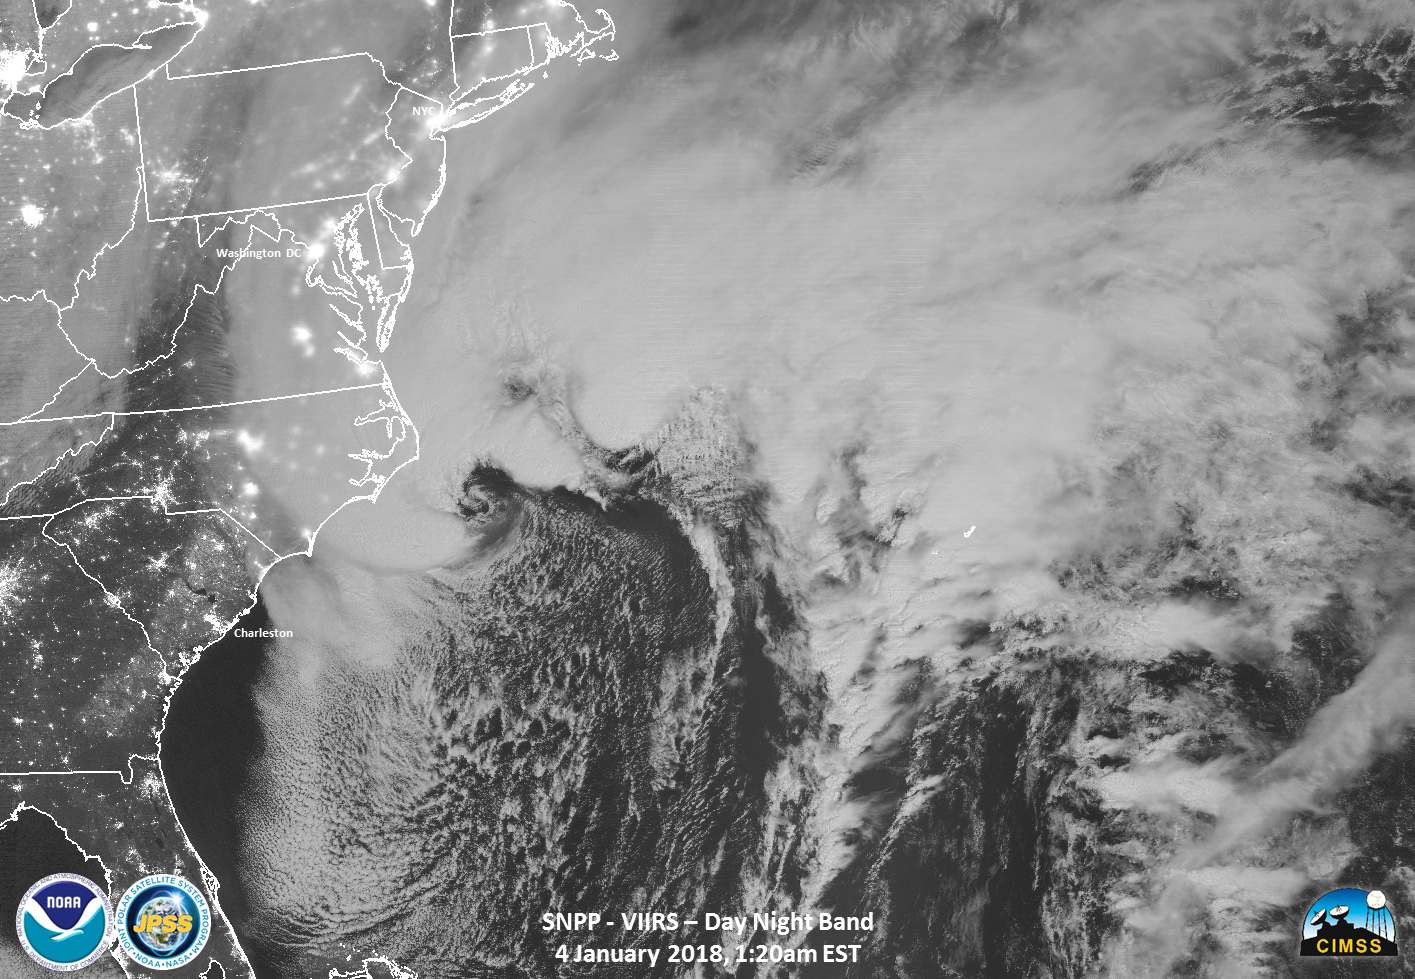 A black and white satellite image of the Mid-Atlantic coast of the U.S. shows a large mass of storm clouds stretching along the edge of the coast from South Carolina to Massachusetts and over the Atlantic Ocean.